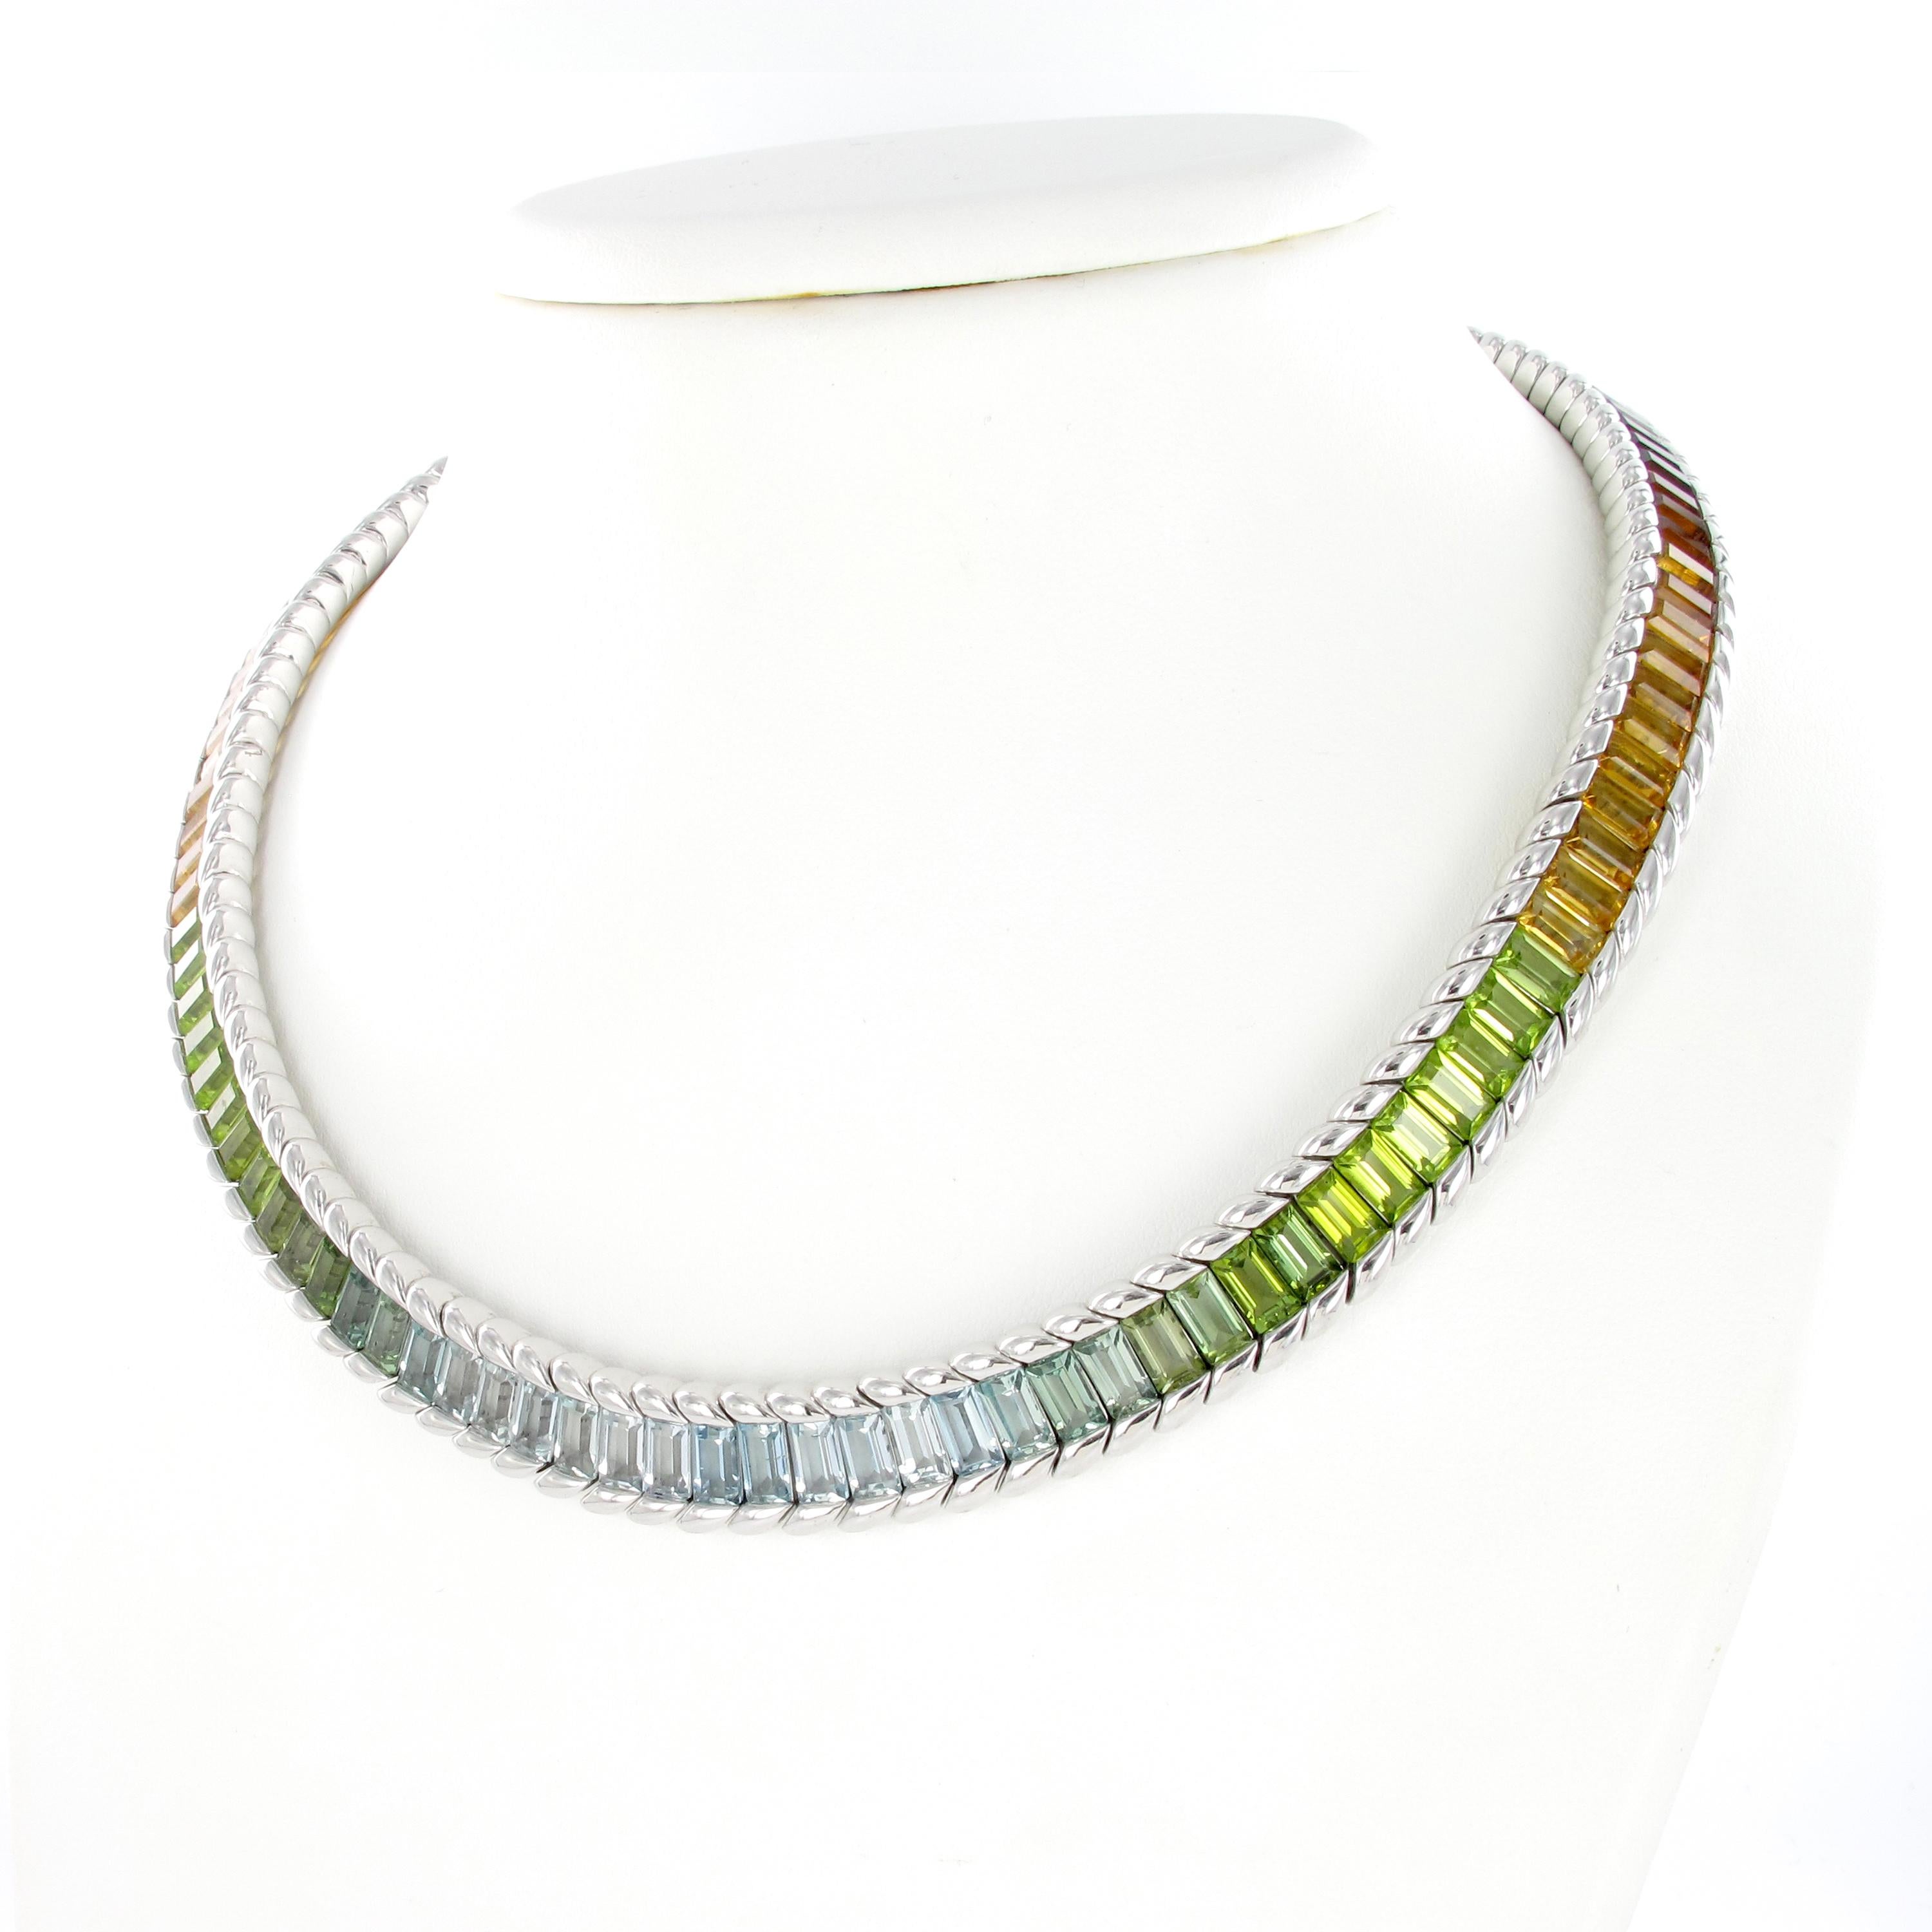 This versatile Gubelin rainbow colored necklace suits every occasion and every wardrobe. Handcrafted in the swiss based Gubelin workshops, this elegant necklace displays a finely matched selection of baguette shaped tourmalines, garnets,